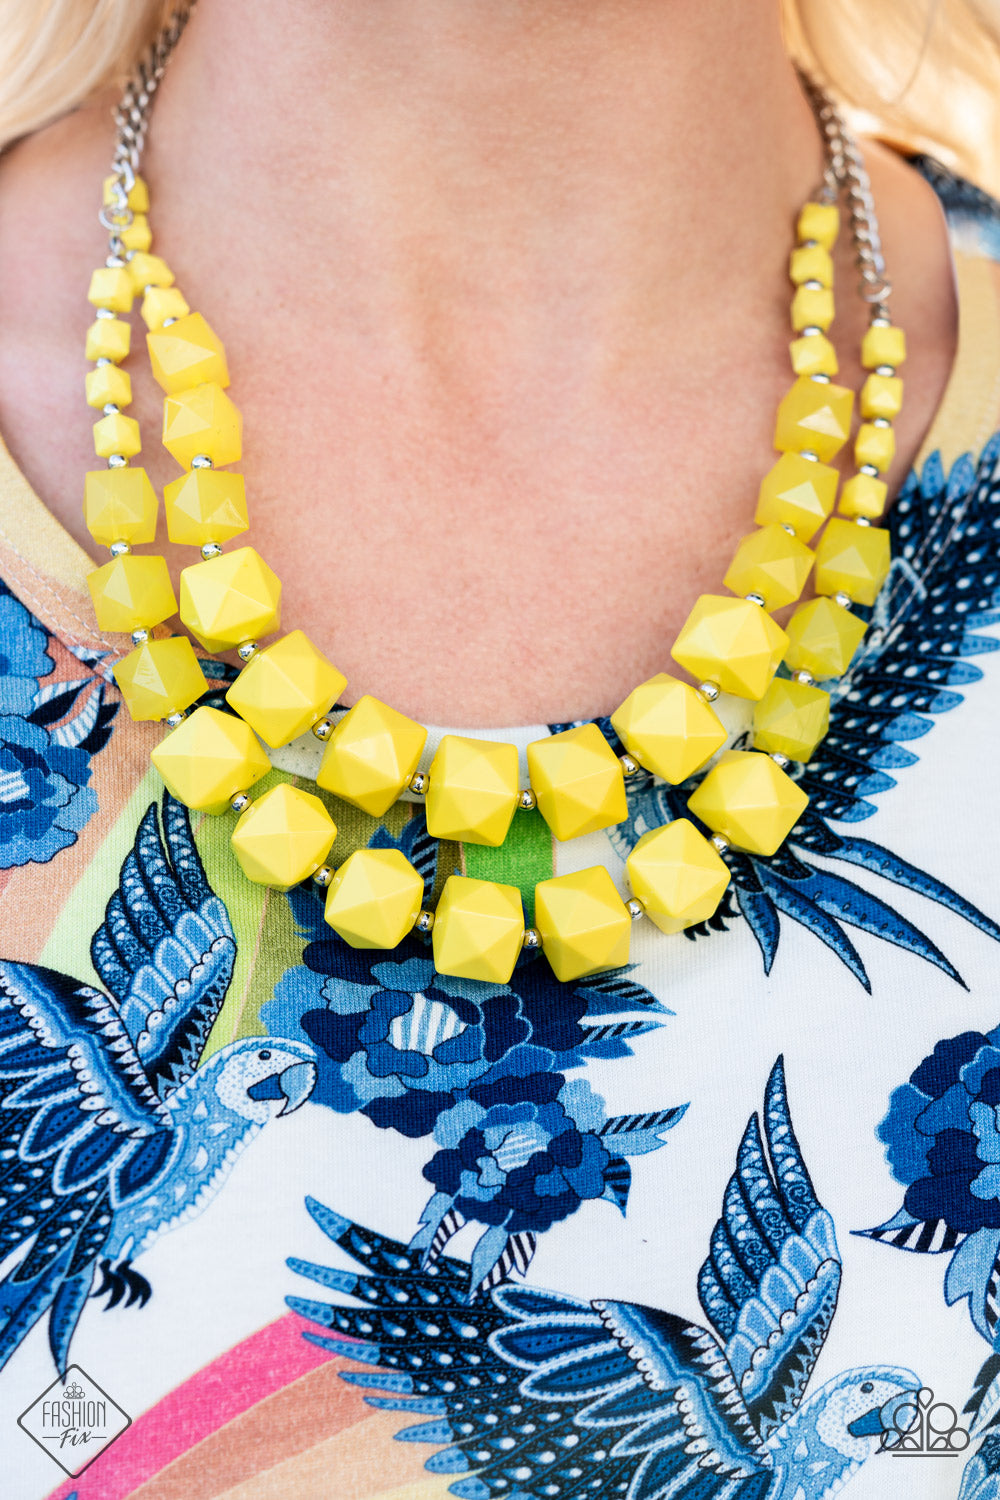 Glimpses of Malibu Yellow Complete Trend Blend Fashion Fix Set (July 2021) - Paparazzi Accessories. The Glimpses of Malibu collection was created with inspiration from the styles of Malibu, CA. Styles in this Trend Blend will feature fun, livable fashion with an upscale flavor. Includes one of each accessory featured in the Glimpses of Malibu Trend Blend: Necklace: " Summer Excursion", Hoop Earring: "Made You HOOK", Bracelet: "Vacay Vagabond", Bracelet: "Trendsetting Tourist"